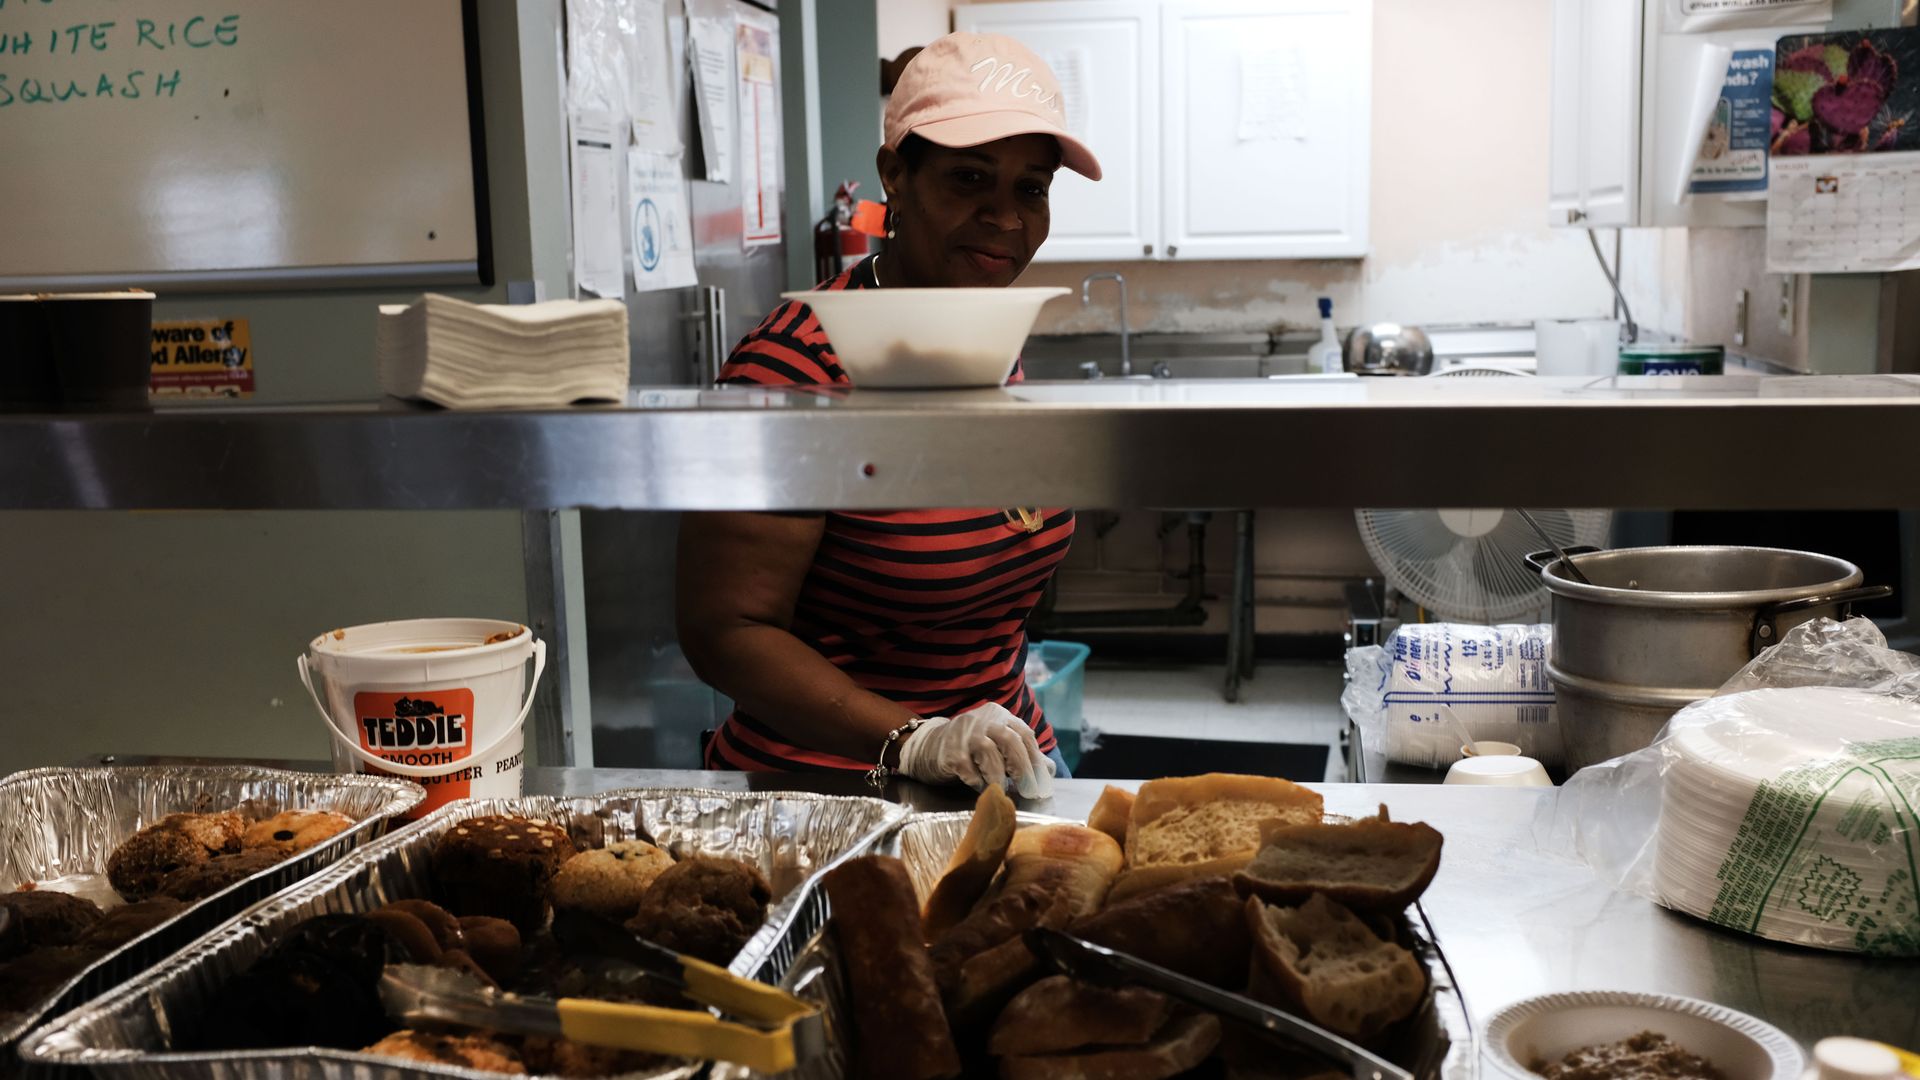 Breakfast is served at the Lazarus House Ministries morning soup kitchen on August 16